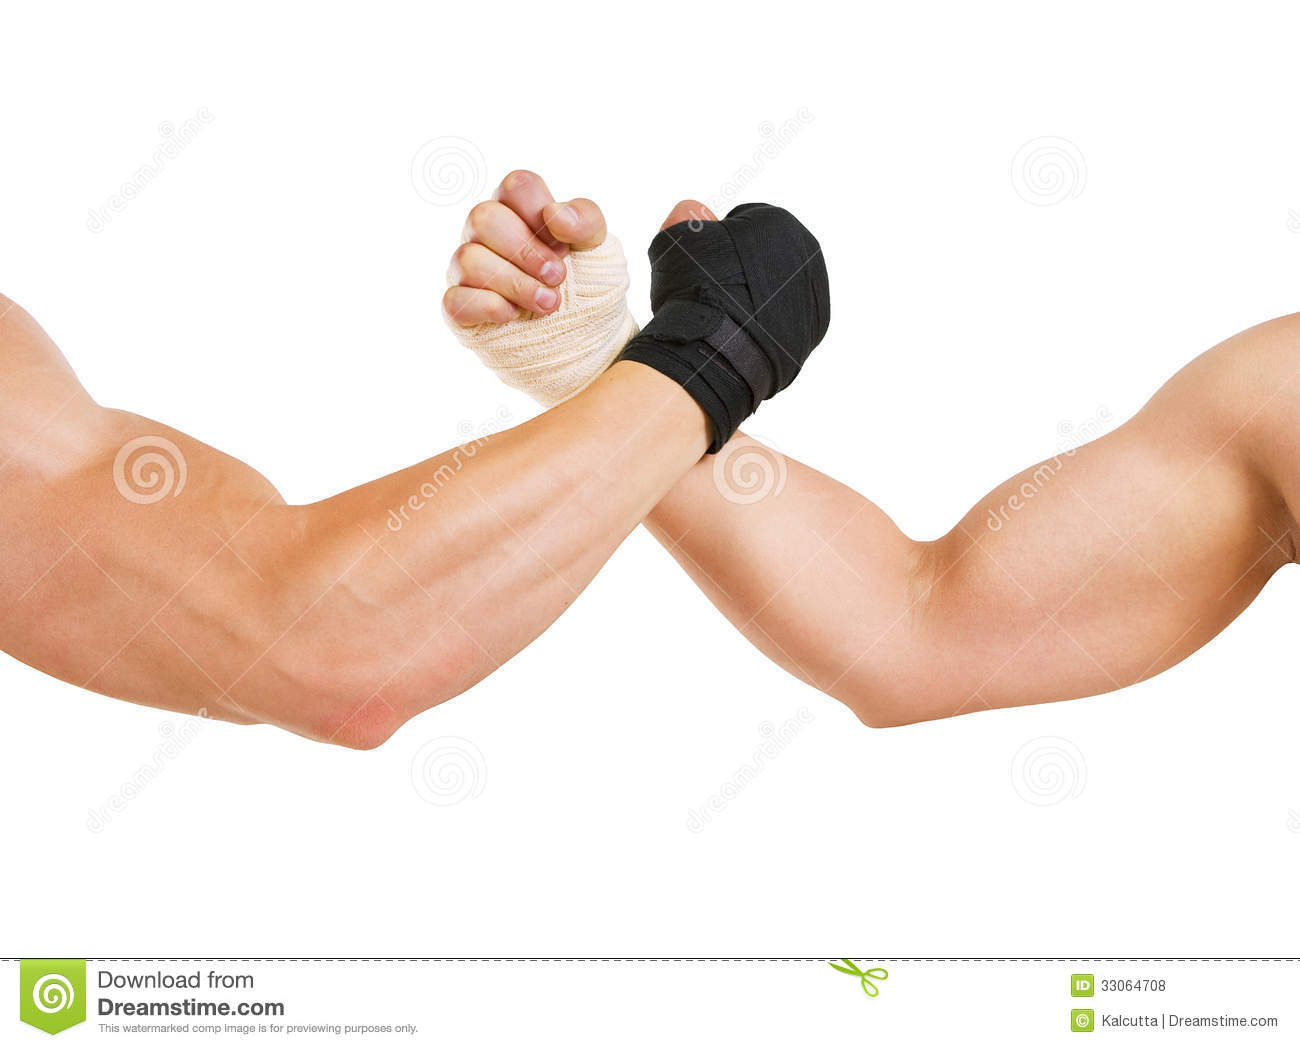 Hand In A White Glove And Hand In A Black Glove Clasped Arm Wrestling